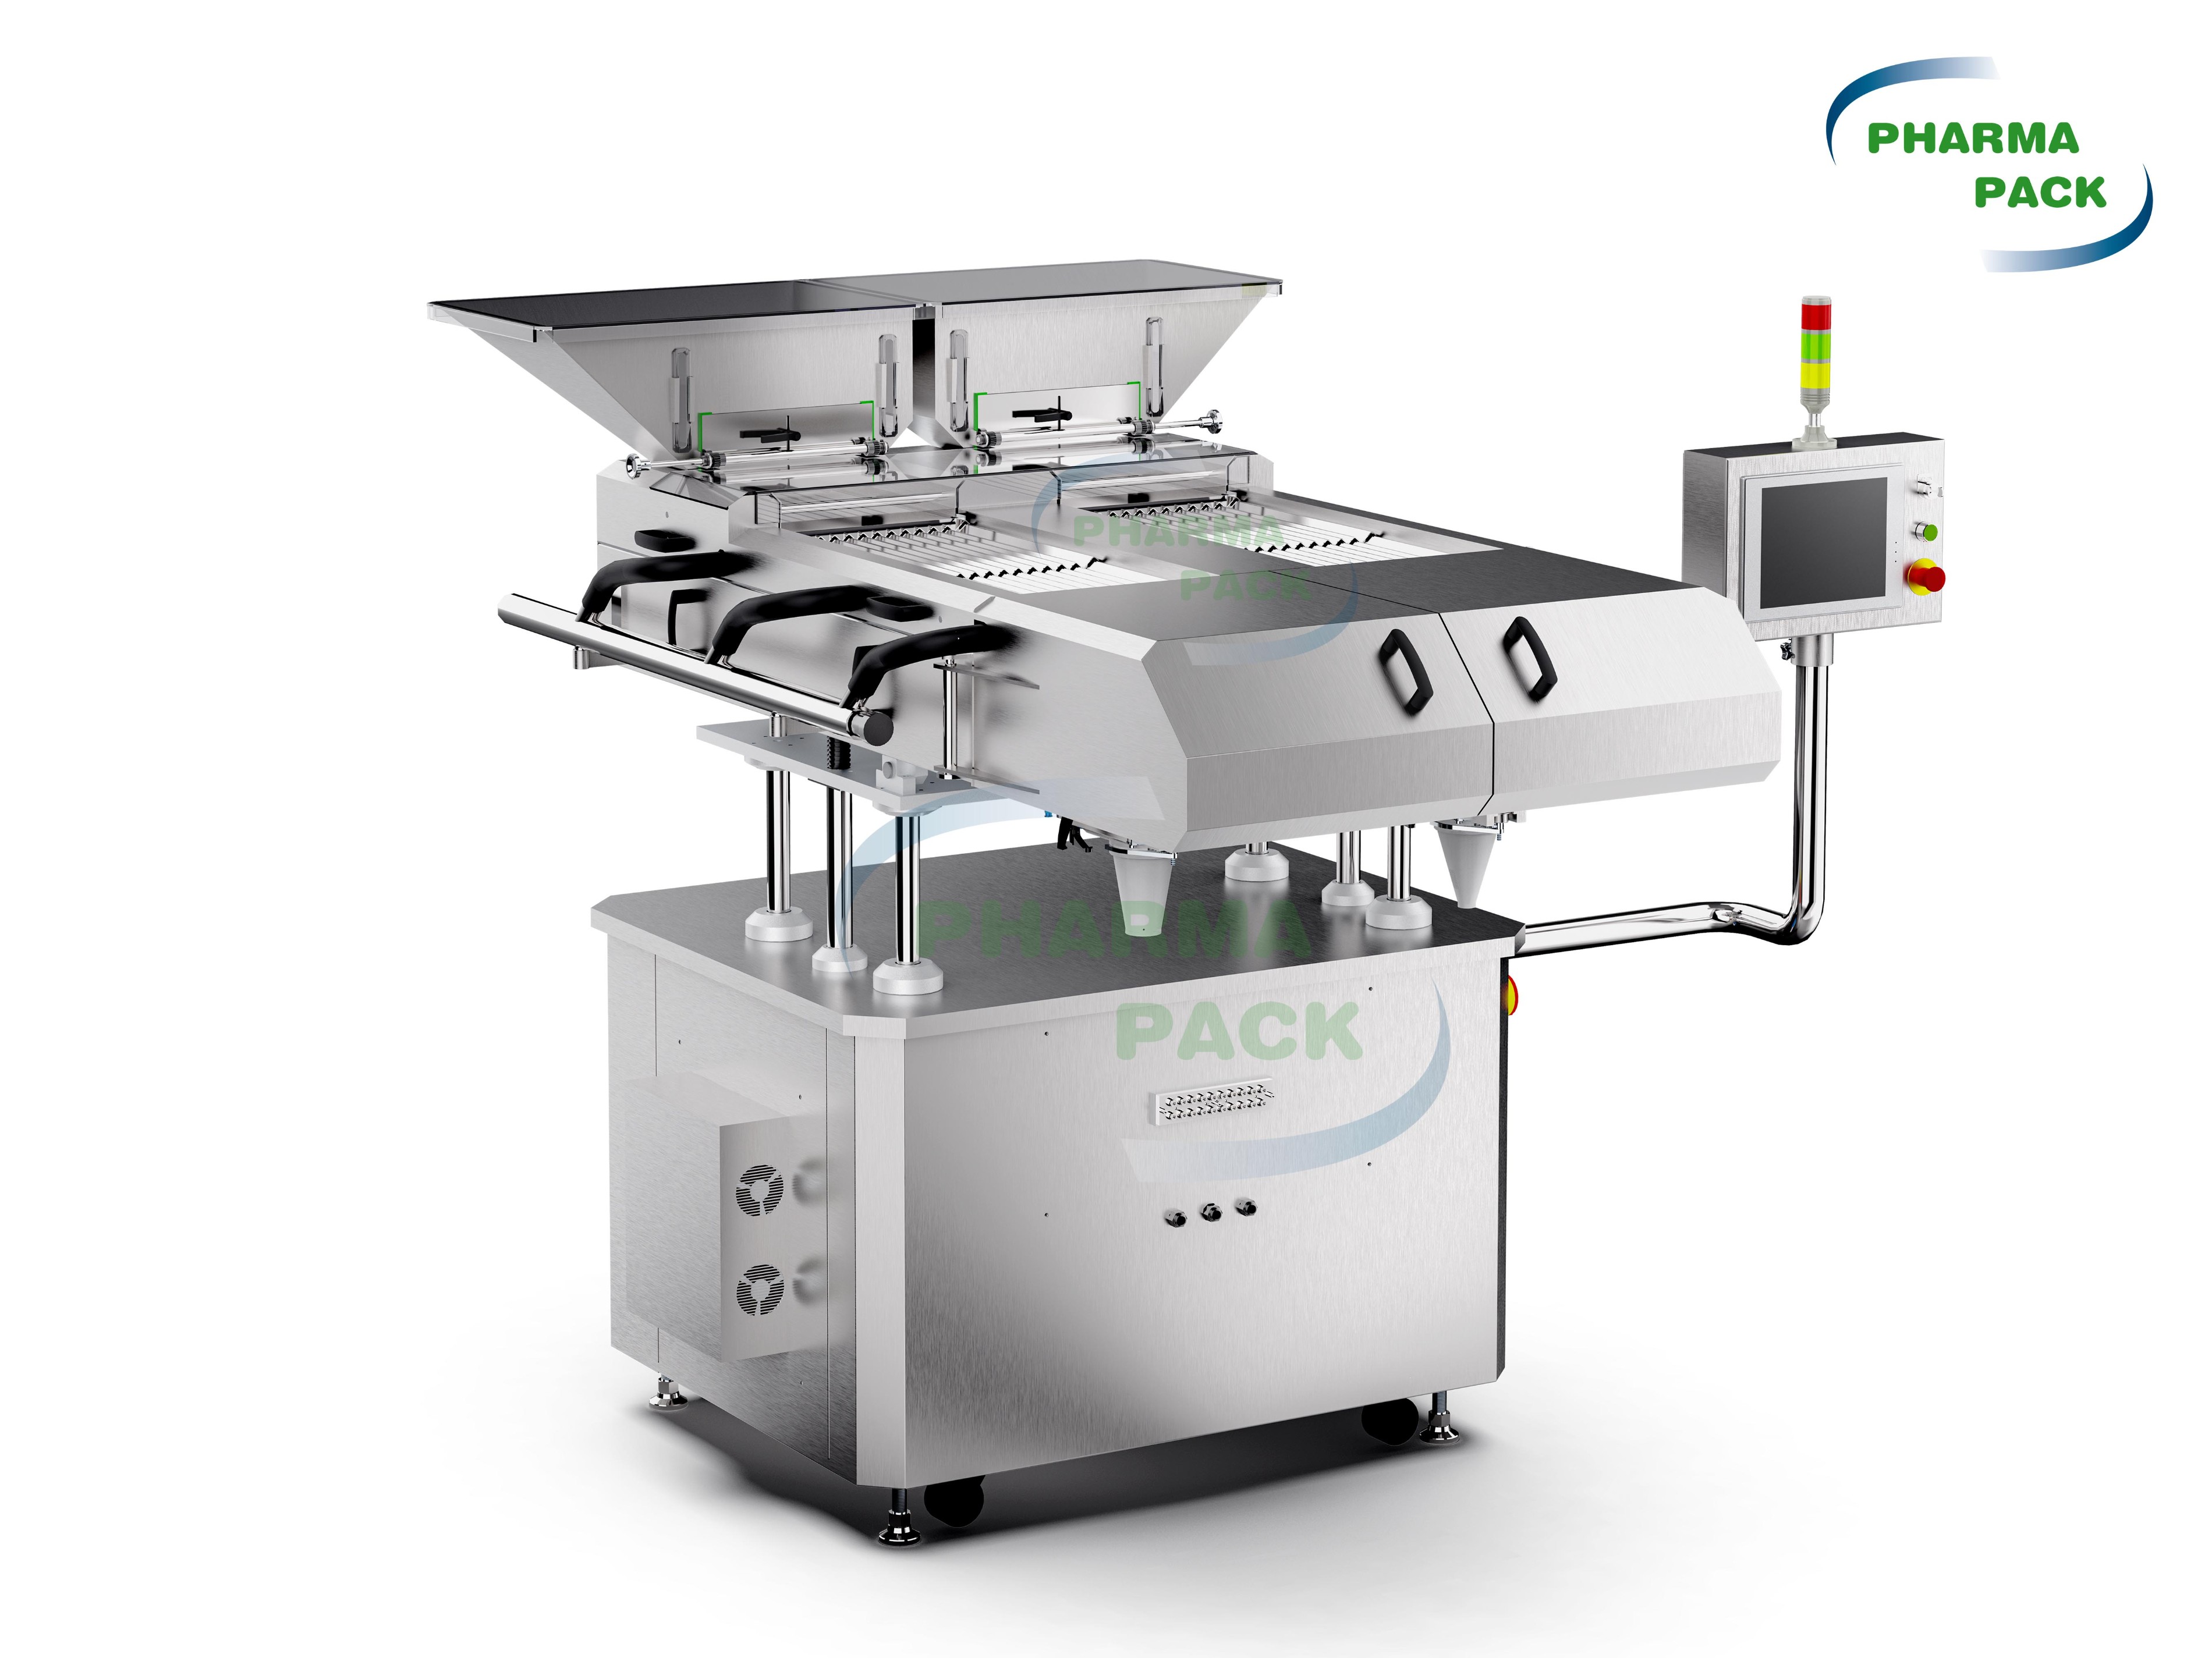 Top 4 Questions about Pharmapack Automatic Counter You Need to Know